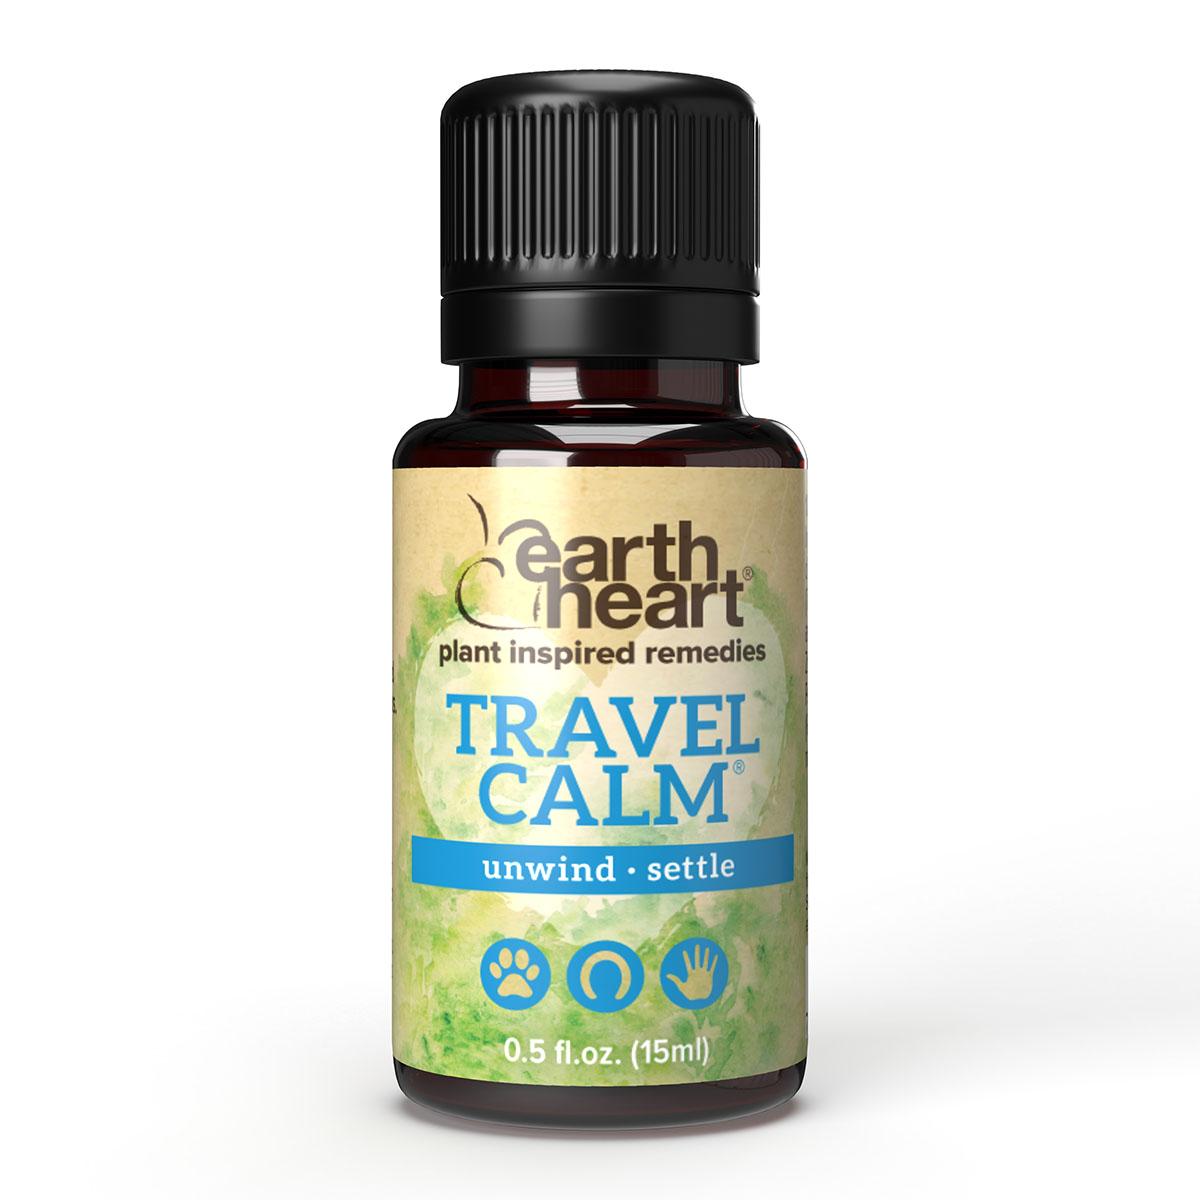 Earth Heart Travel Calm Diffuser Blend Natural Pet Remedy Essential Oil